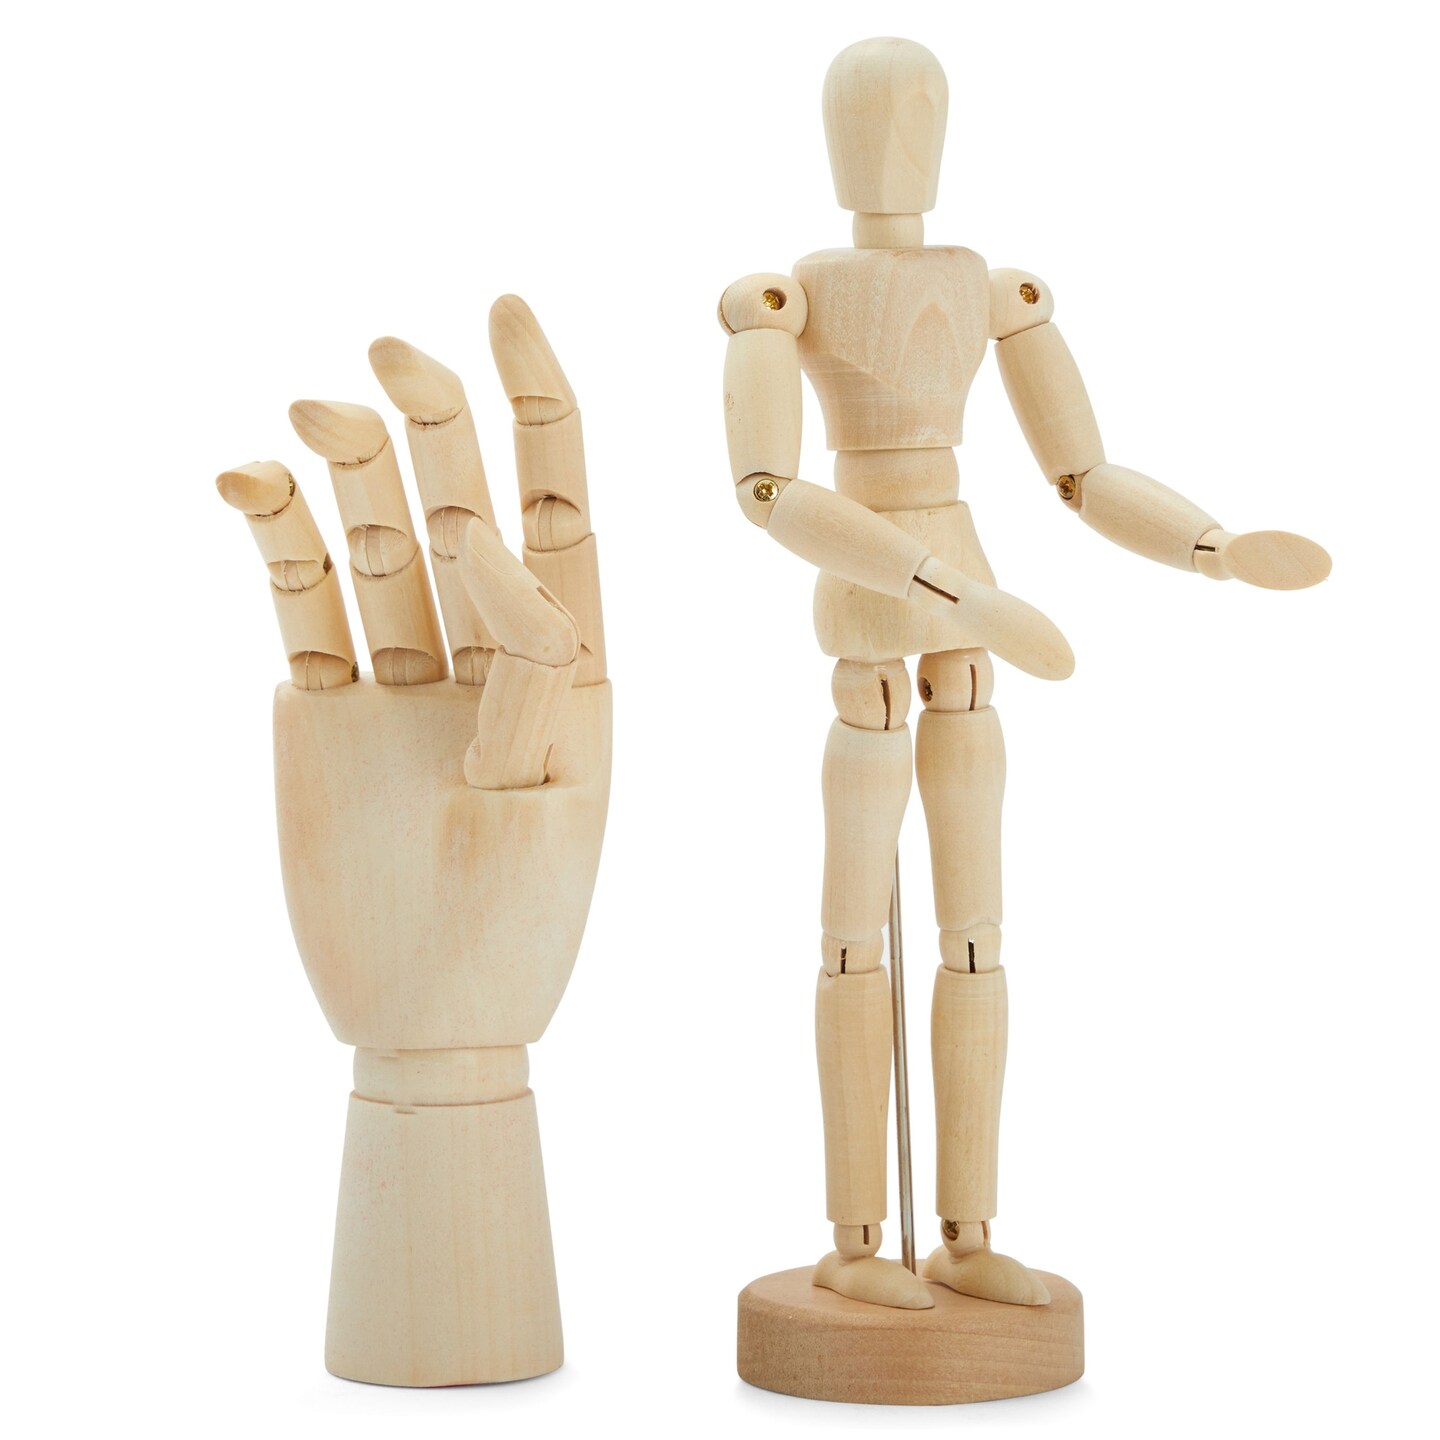 7 Wooden Hand Model and 8 Posable Wooden Mannequin Figure for Drawing,  Adjustable Art Supplies (2-Piece)